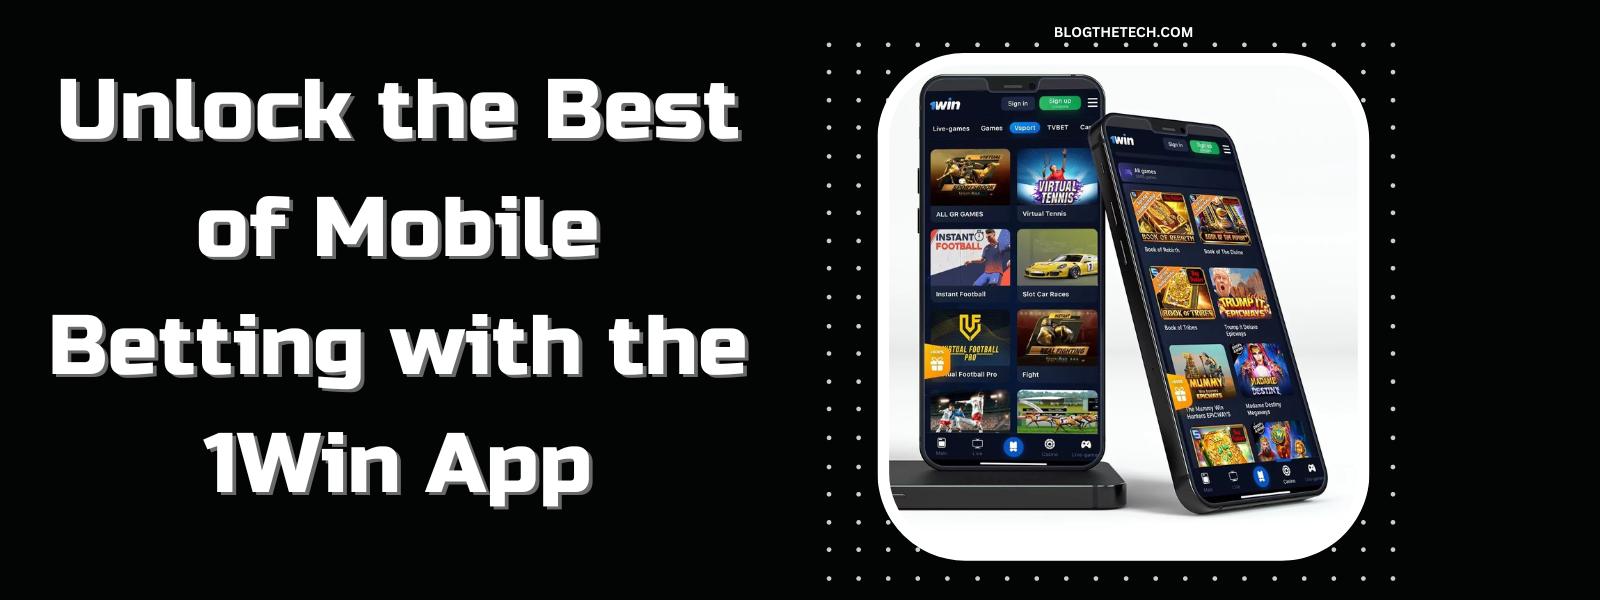 Mobile-Betting-with-the-1Win-App-Featured